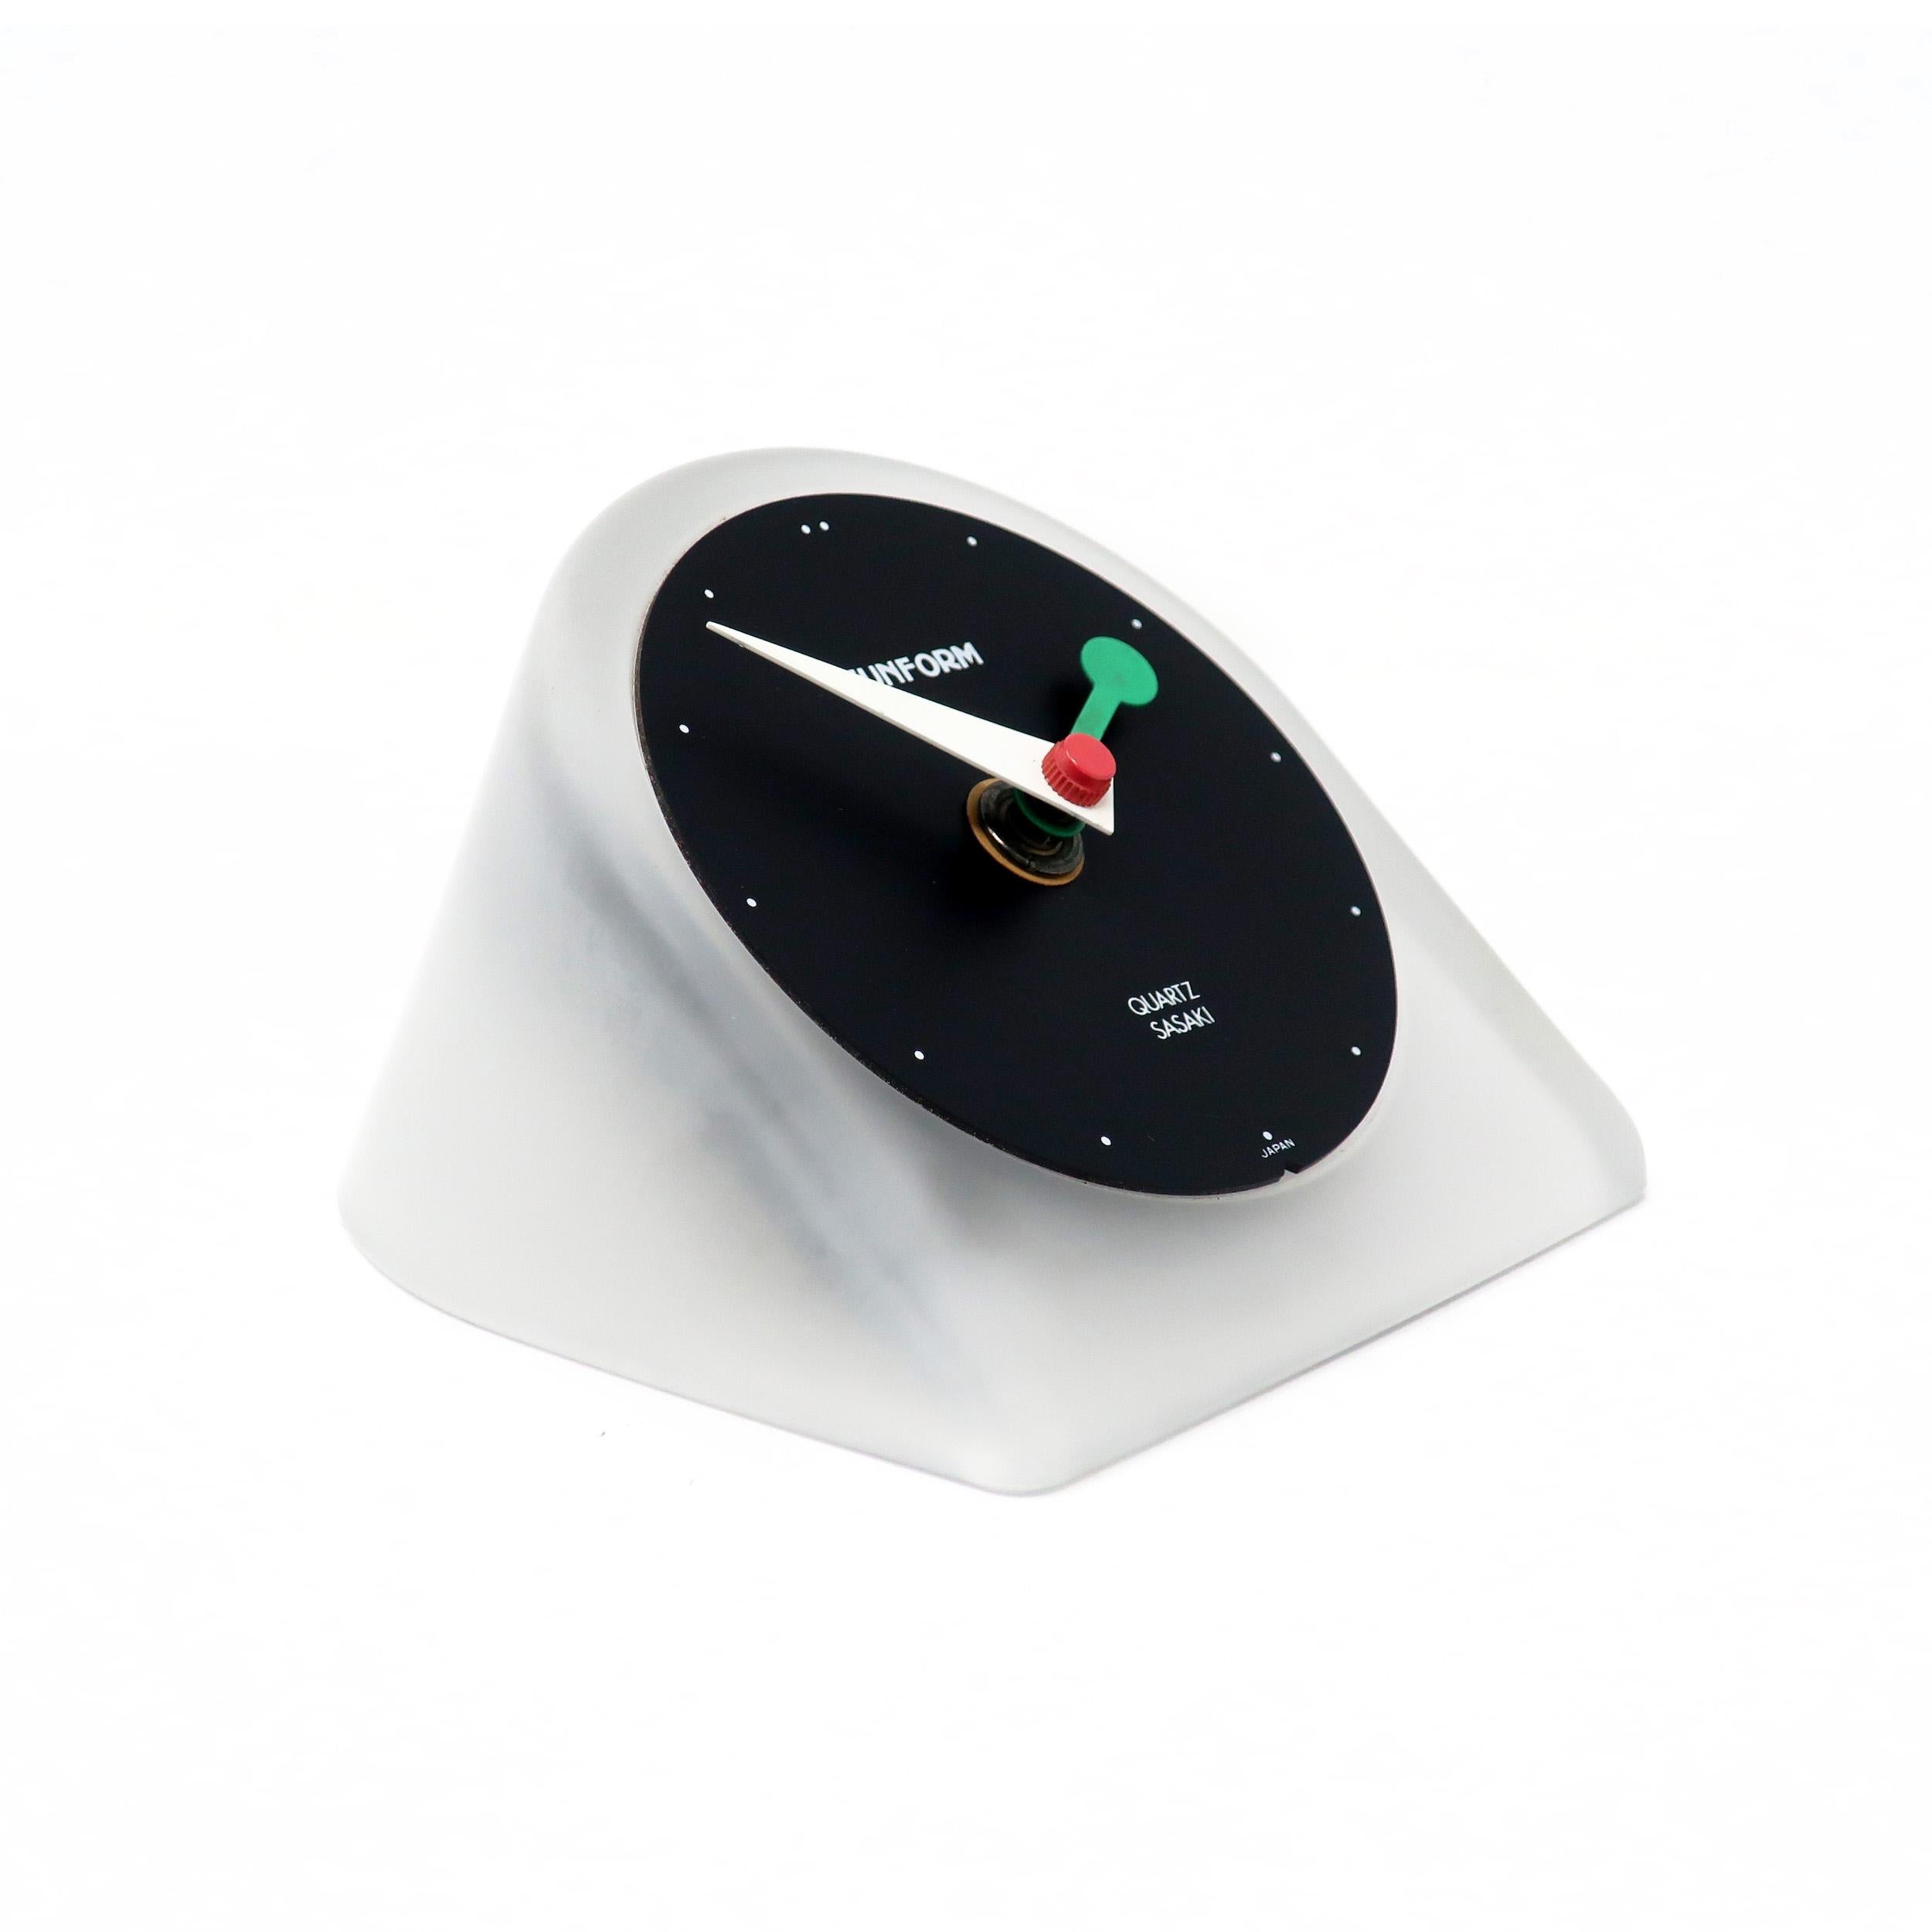 A handsome postmodern desk clock by Sunform, a sub-brand of Sasaki, the Japanese consumer products manufacturer. Made of frosted glass with black face, green and white hands, and red accents. The perfect simplicity of 1980s design.

In good